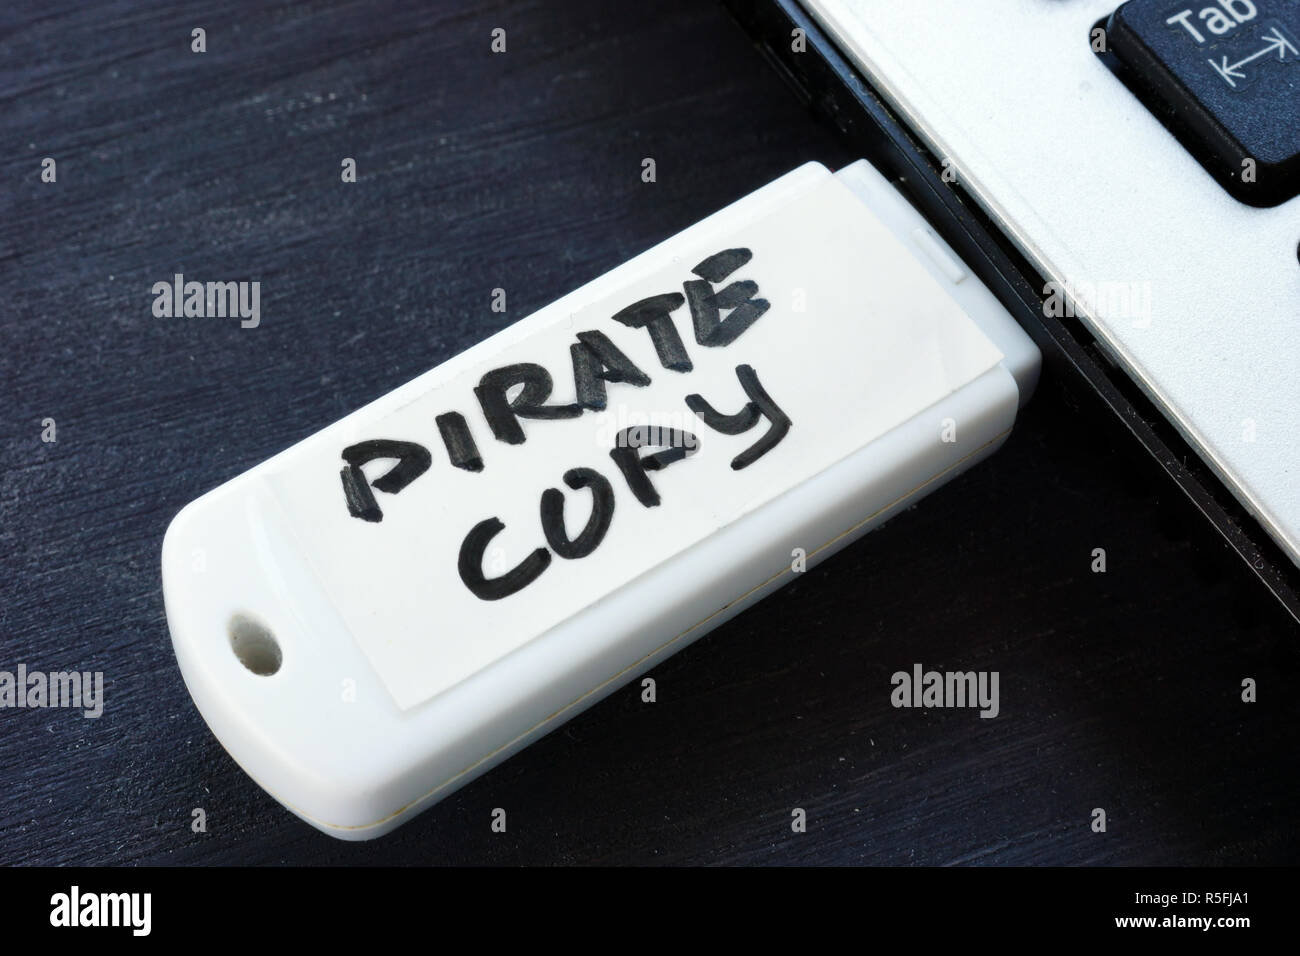 Pirate copy written on a flash drive. Copyright law. Stock Photo